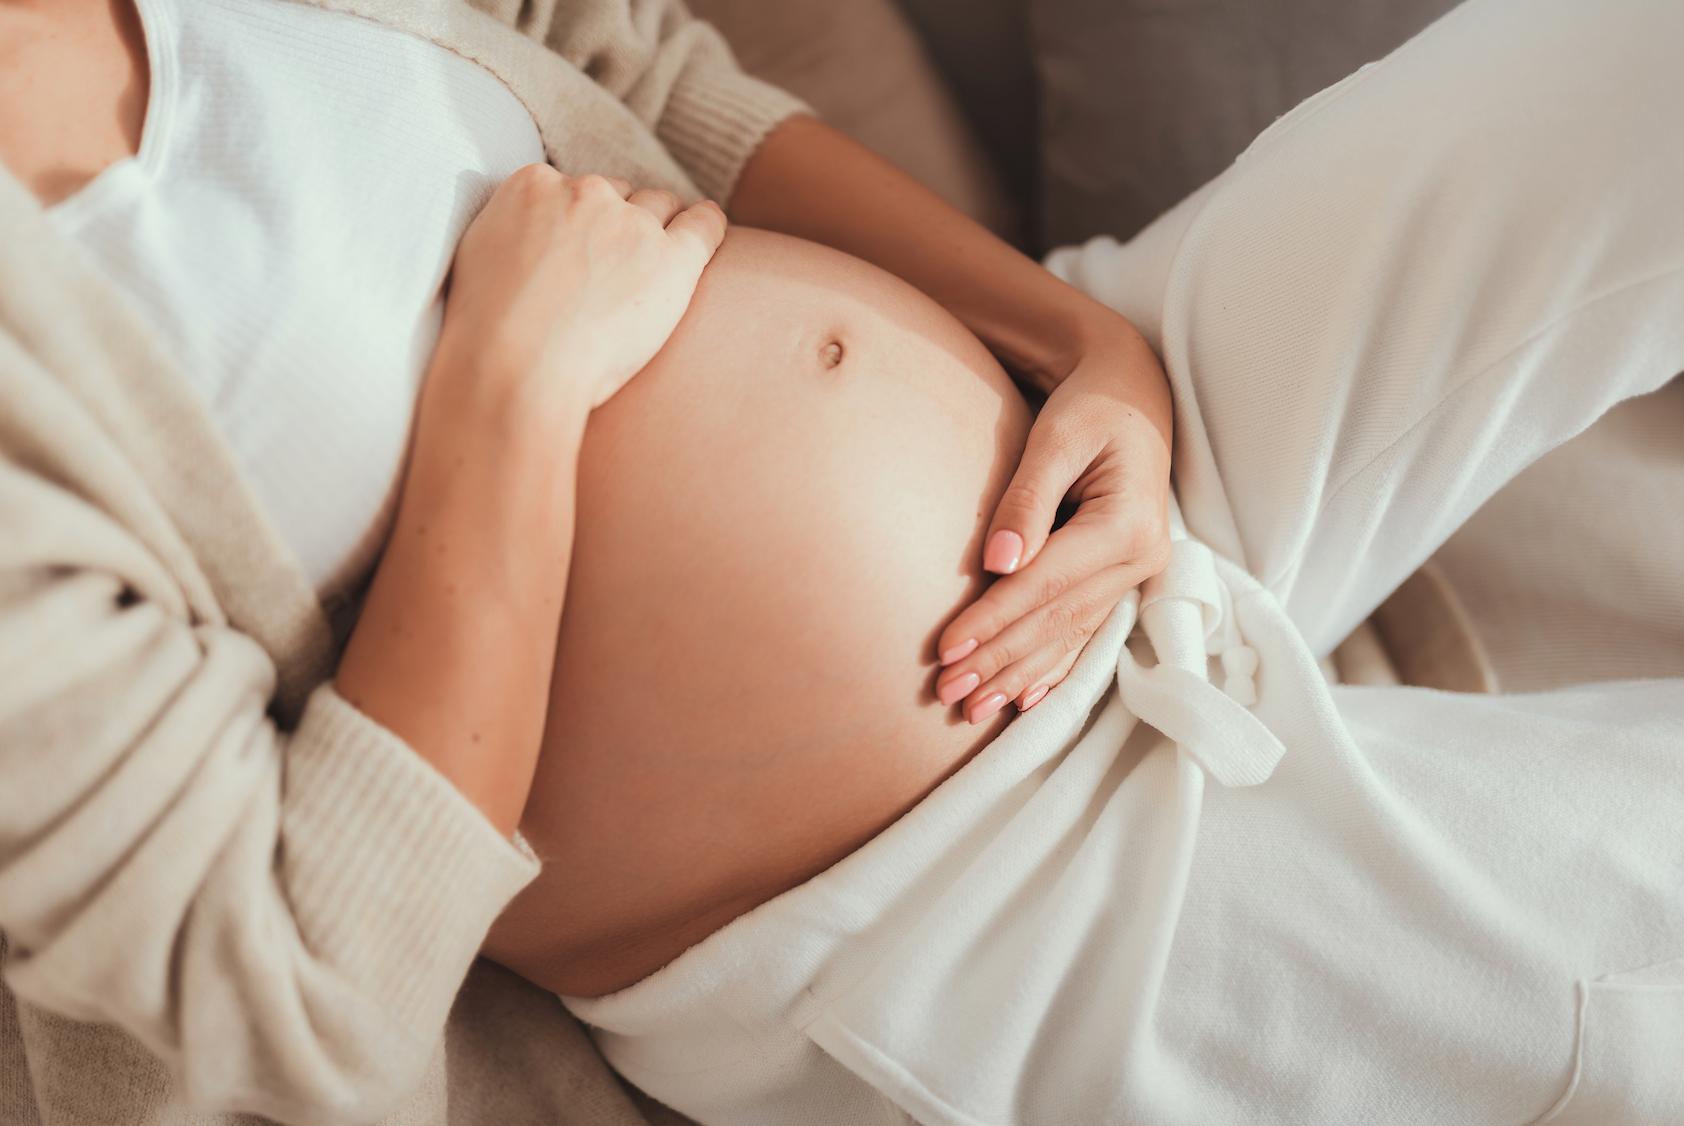 Skincare Ingredients To Avoid While Pregnant